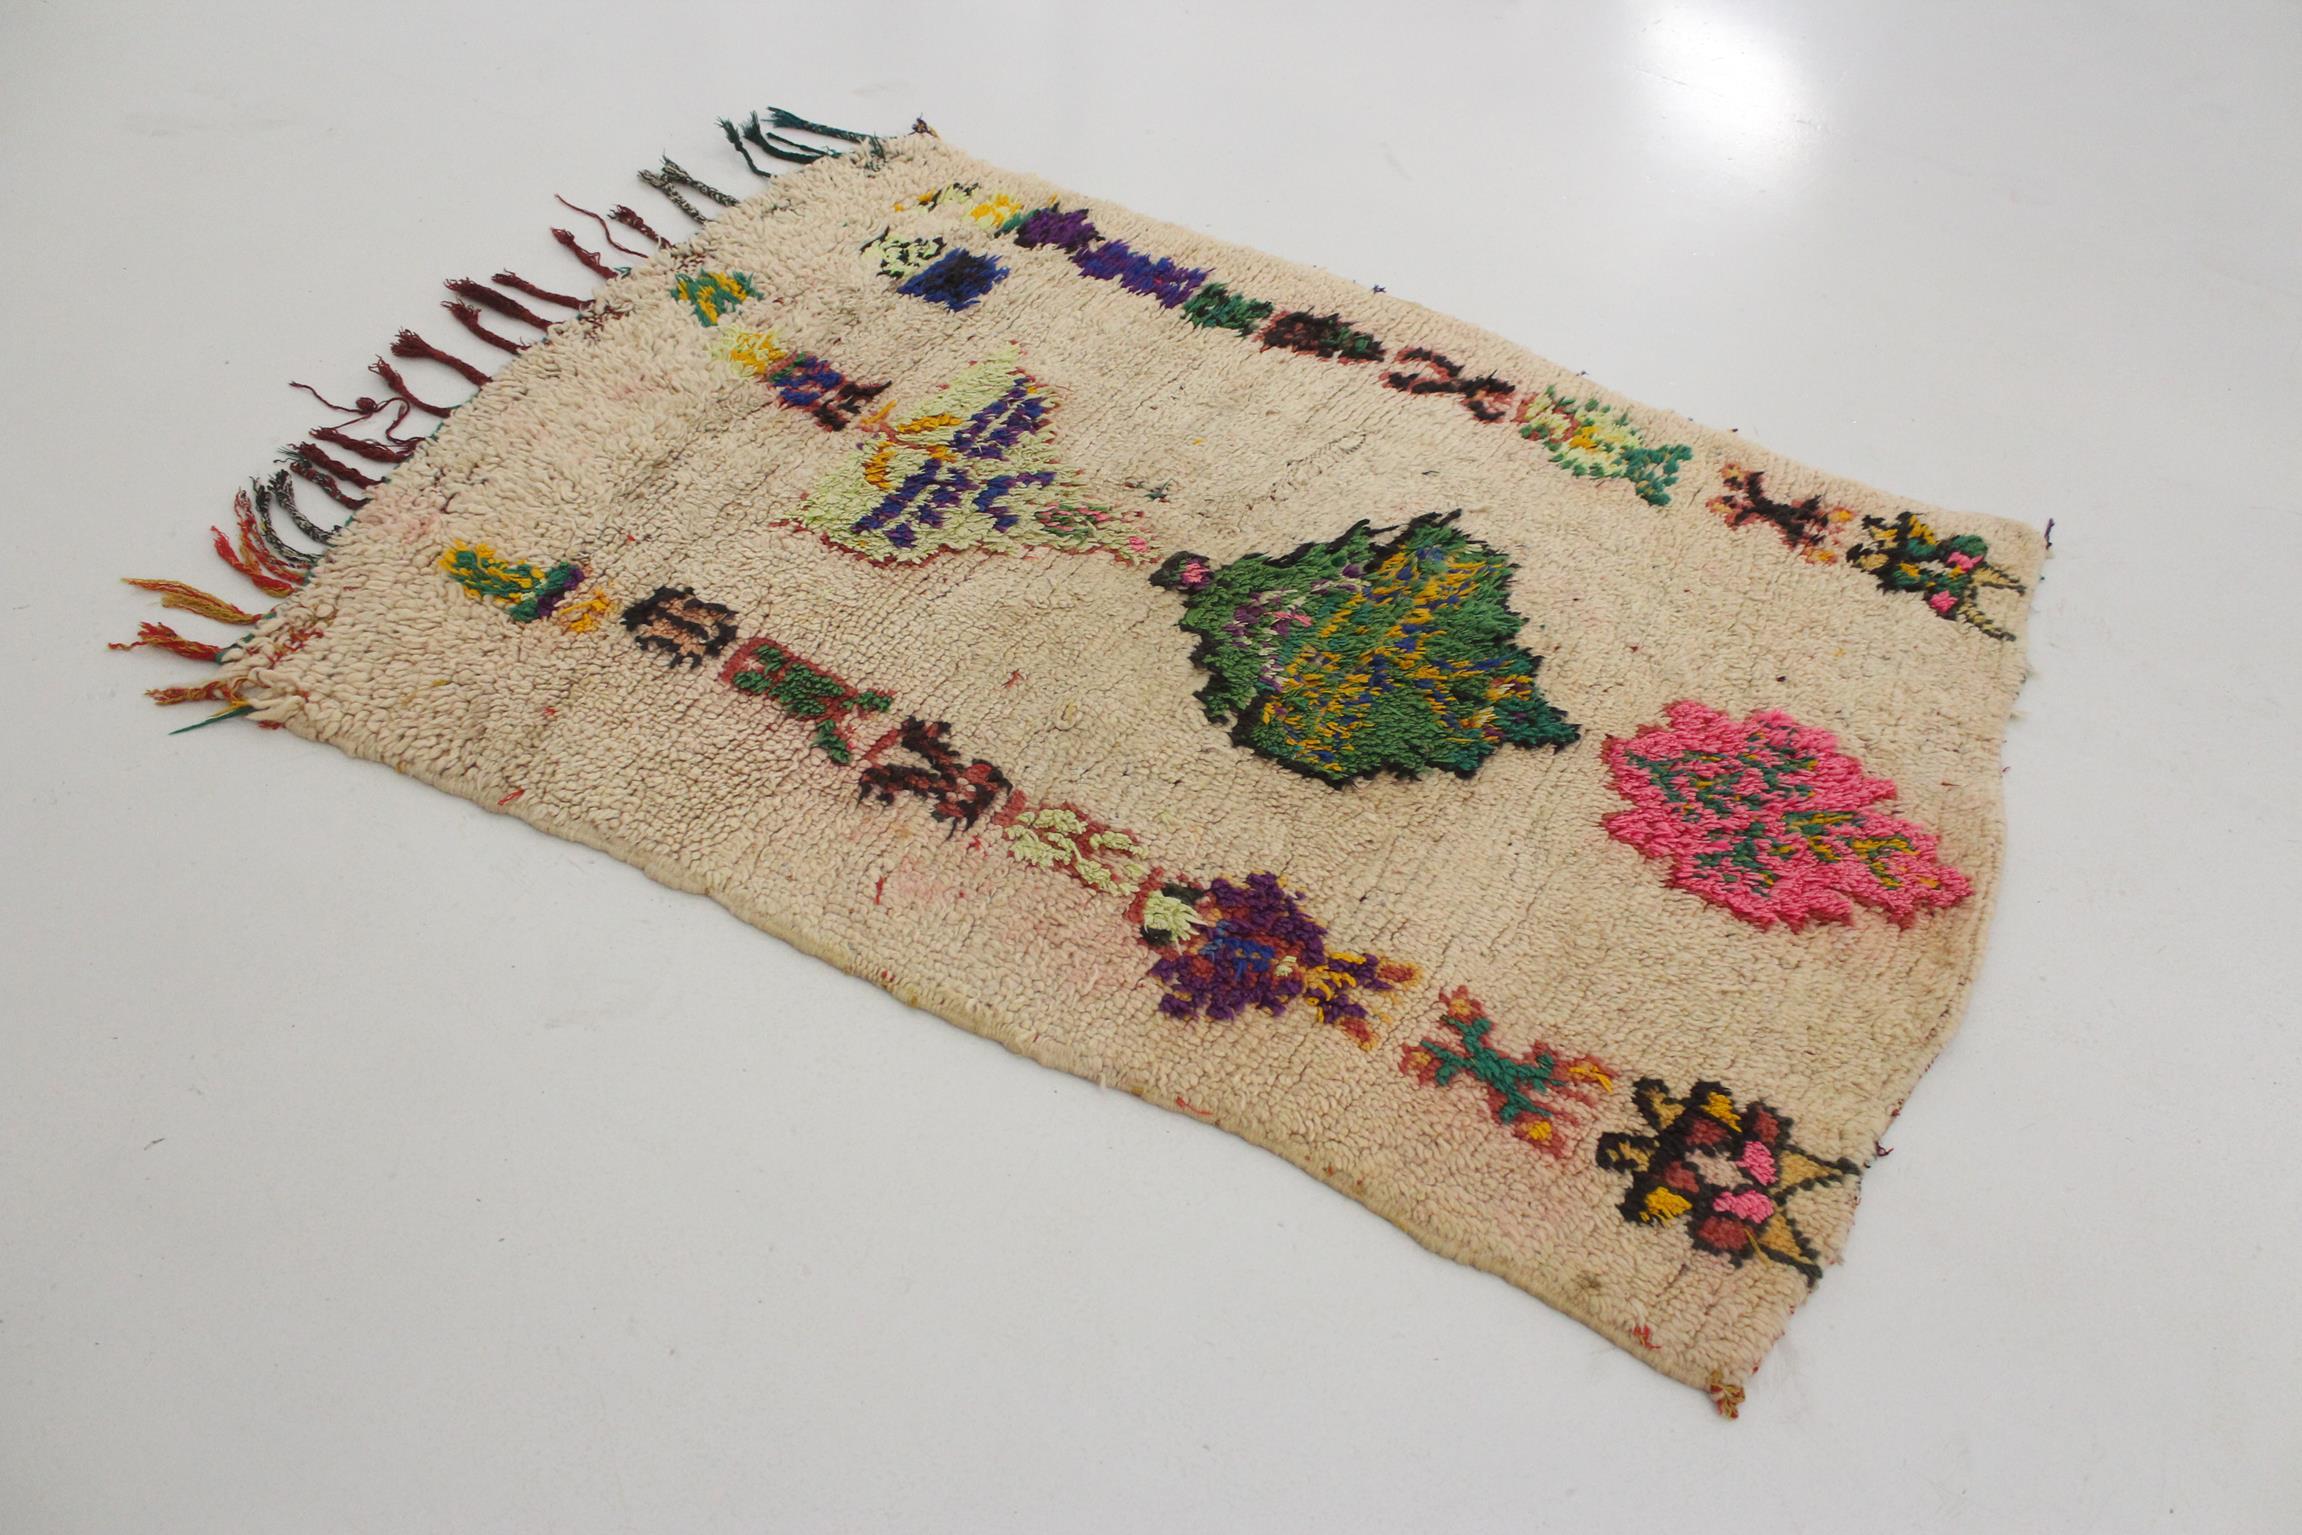 I selected this lovely rug from piles of carpets as I have always loved a vintage, artistic Azilal rug with traditional berber designs! The background color of this small rug is a beige (the natural wool color, actually) with unregular, colorful and